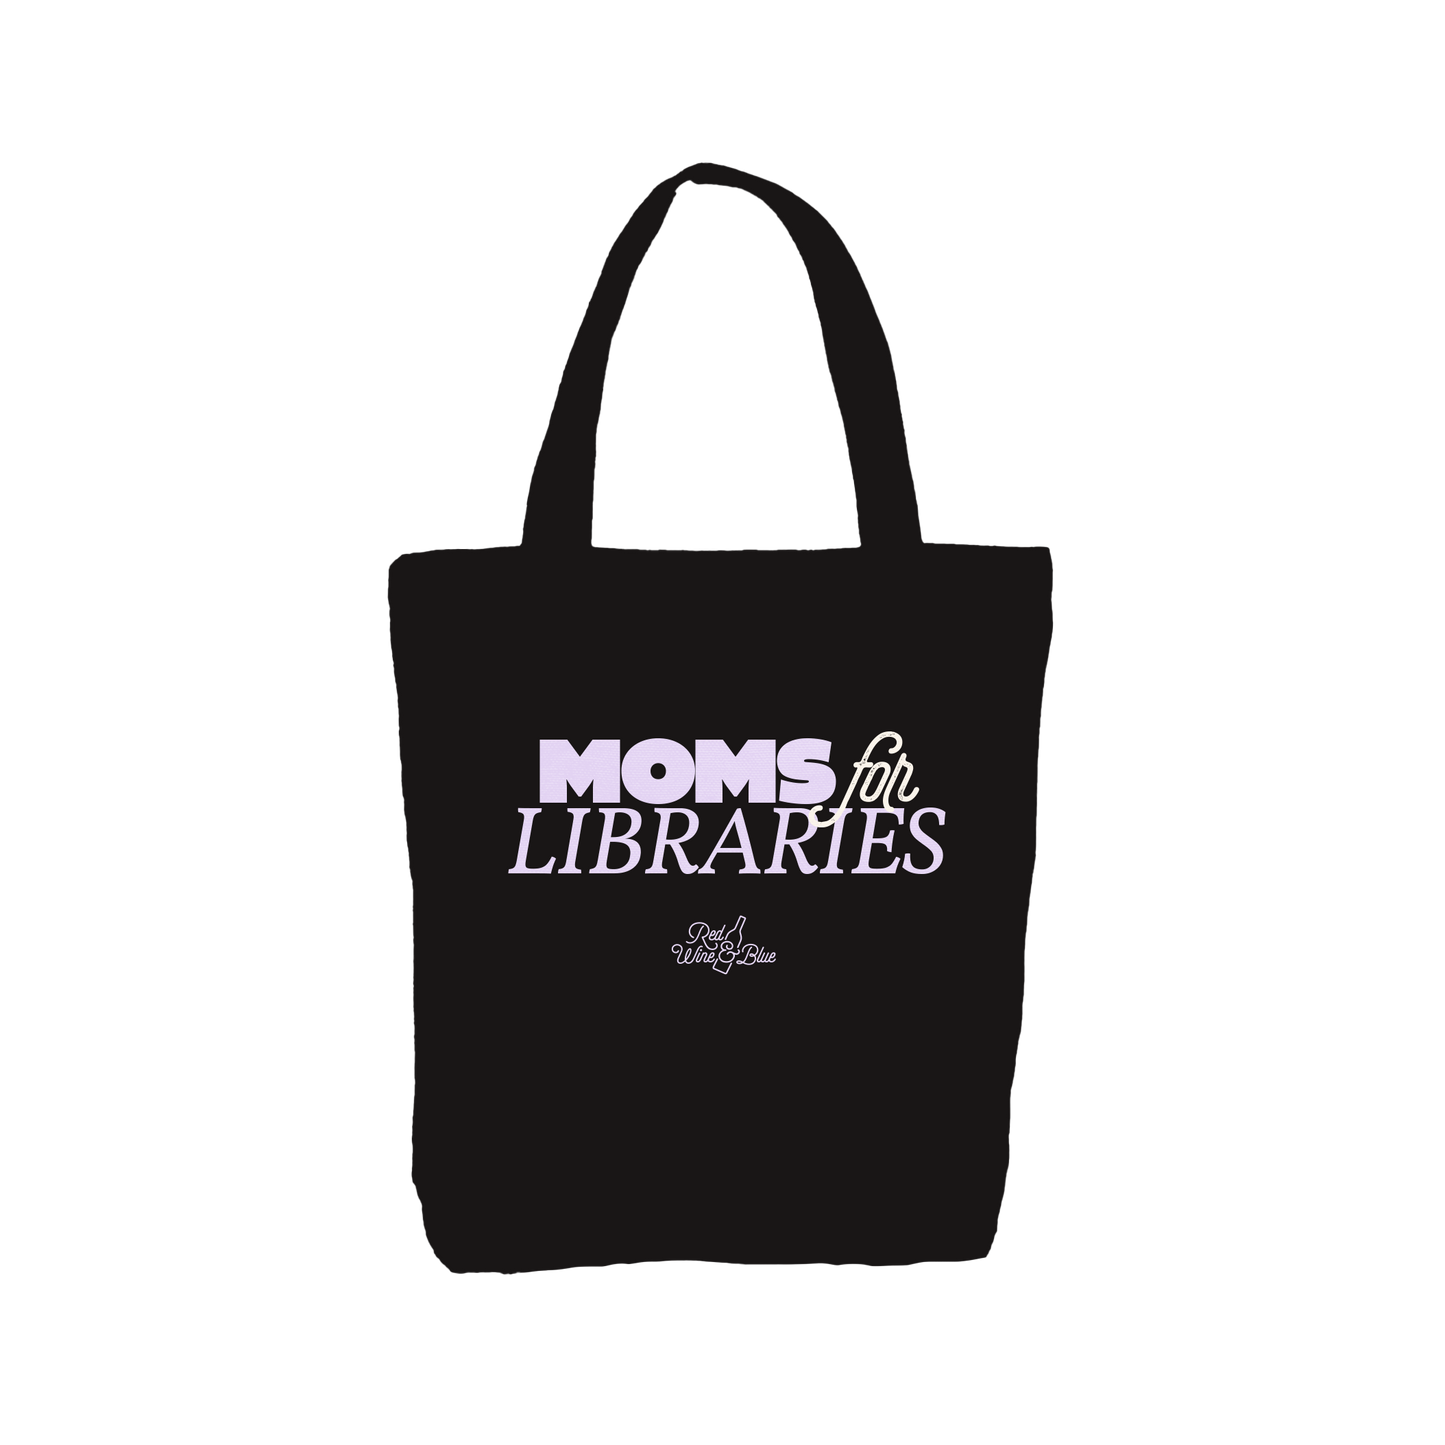 Moms for Libraries Tote